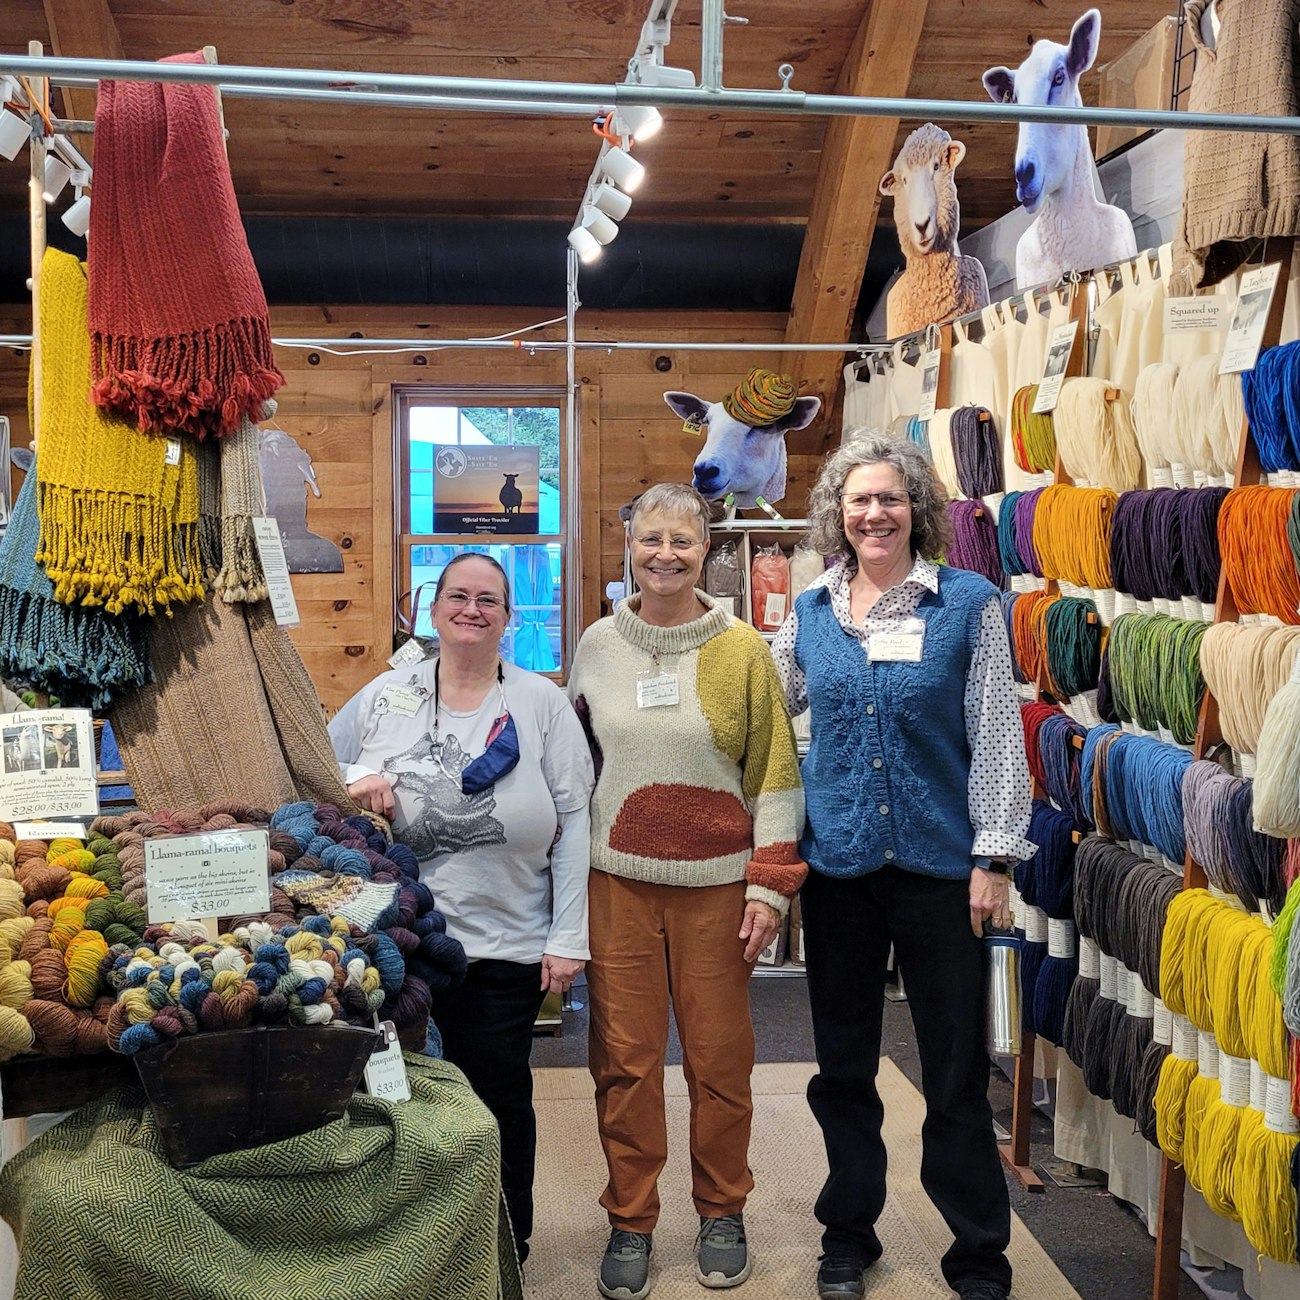 Three women in booth filled with yarn and wool products